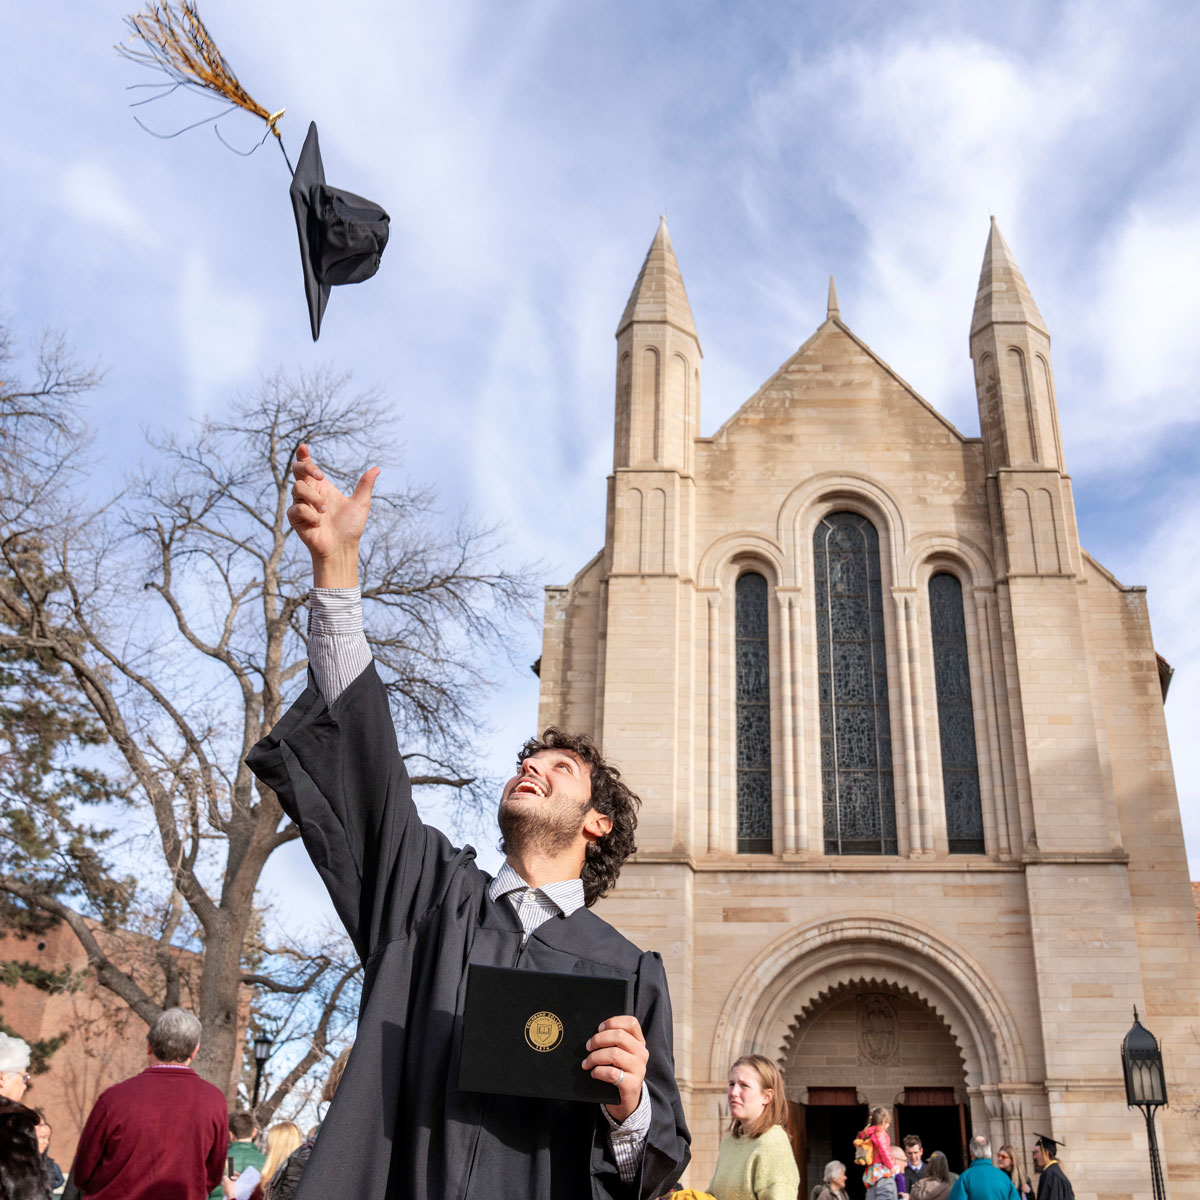 Marco Barracchia is pictured after Colorado College's 2022 Winter Commencement on Dec. 18, 2022. Photo by Lonnie Timmons III / Colorado College.